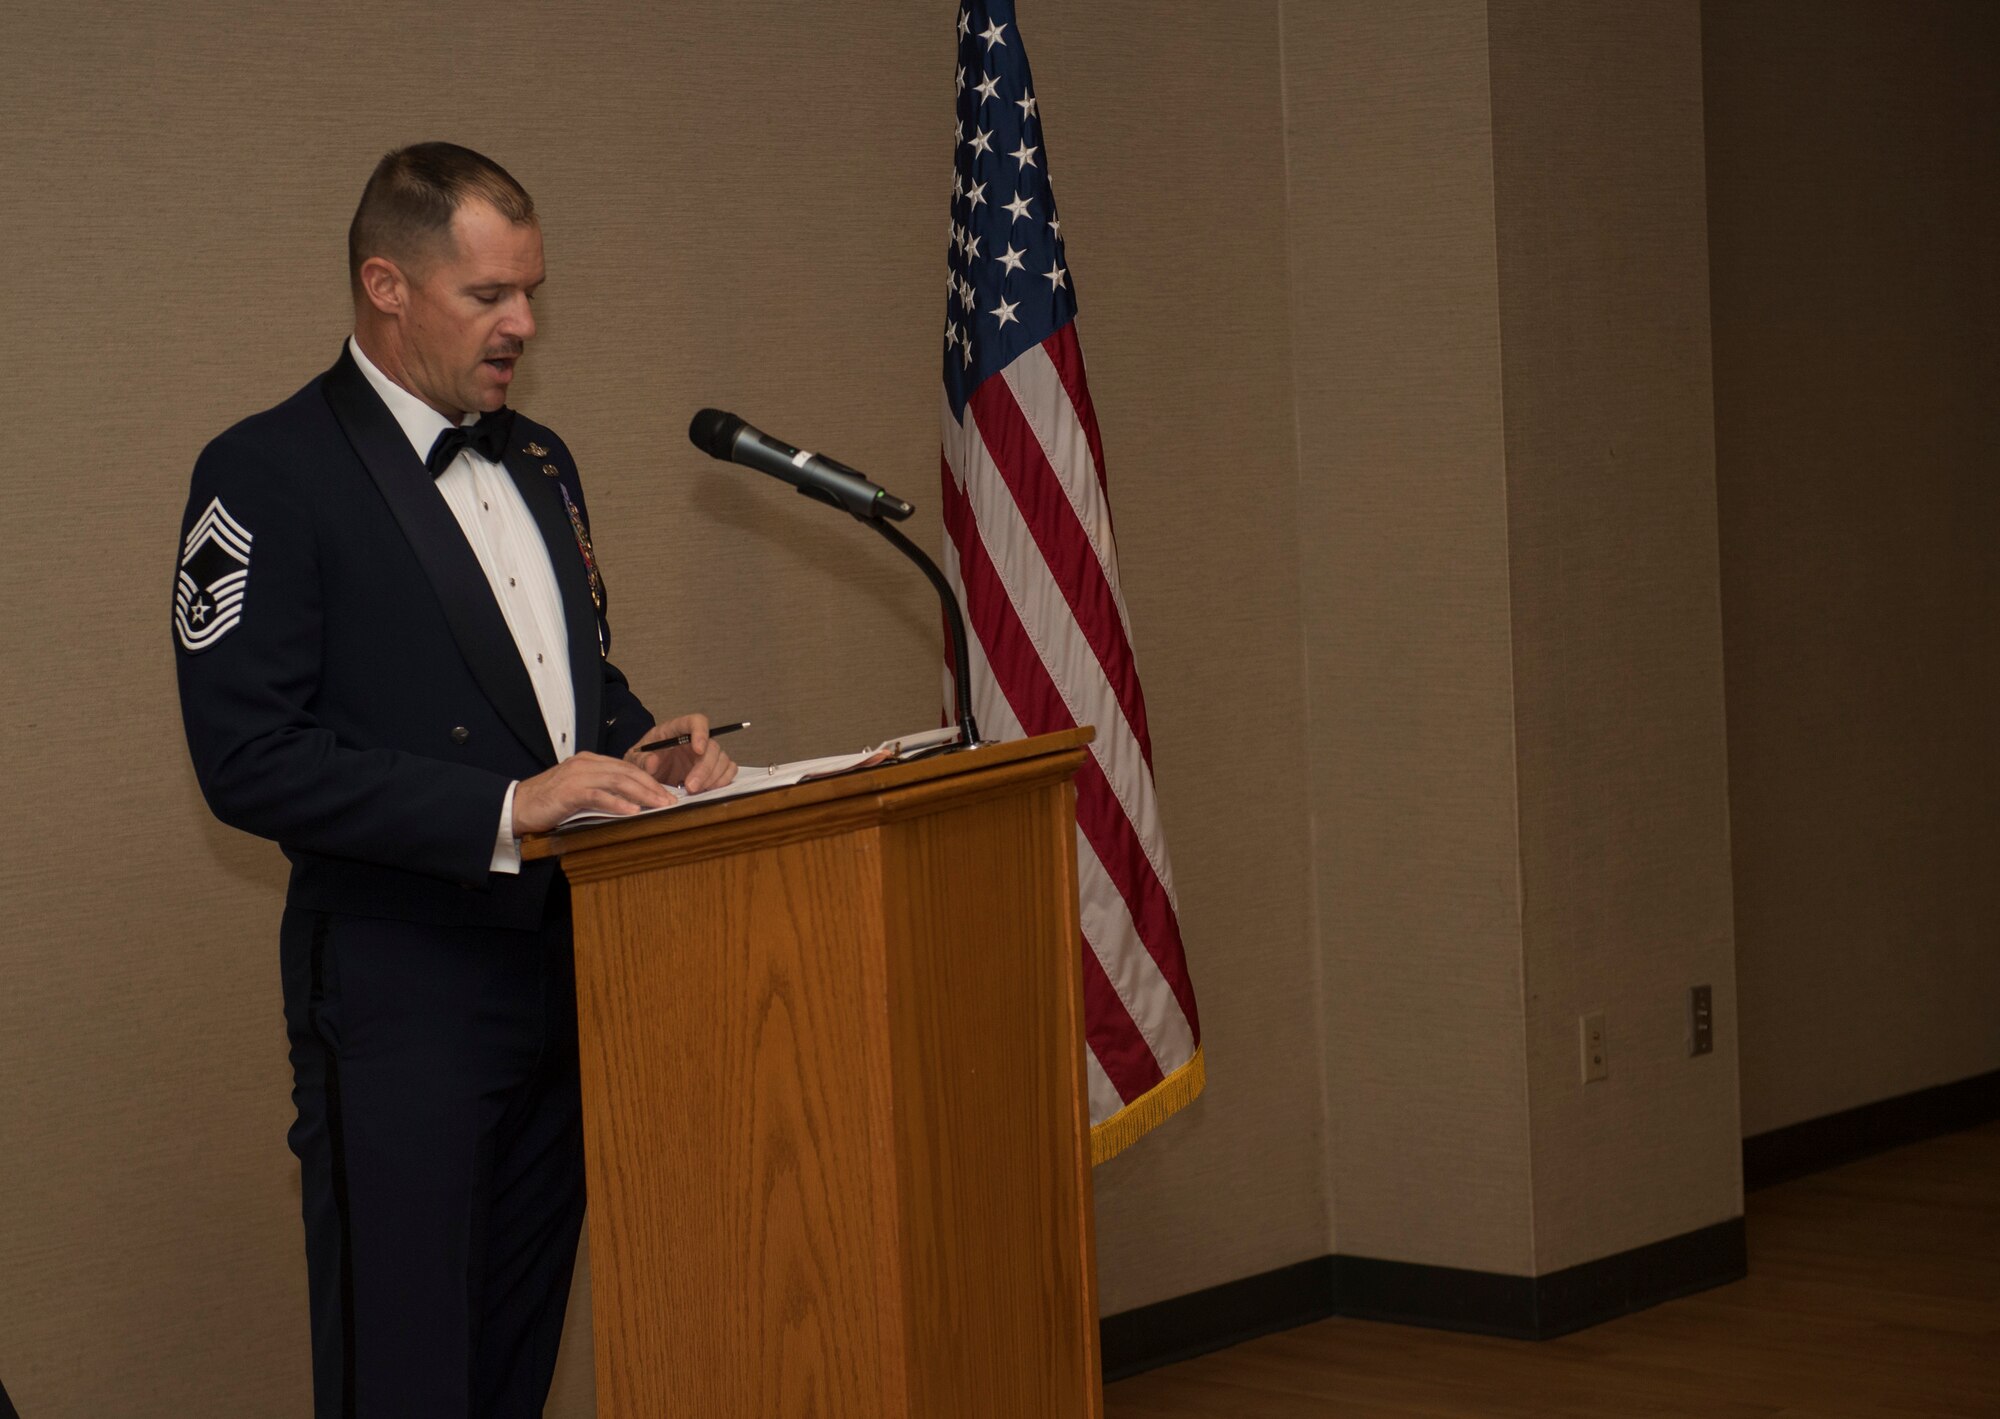 Chief Master Sgt. Kevin Stewart, 41st Resuce Squadron chief enlisted manager, gives a speech during an Airman Leadership School (ALS) graduation ceremony, Feb. 7, 2019, at Moody Air Force Base, Ga. ALS is a the 5-week course designed to develop Airmen into effective front-line supervisors by focusing on building leadership abilities, teamwork skills and effective communication. (U.S. Air Force photo by Airman Taryn Butler)